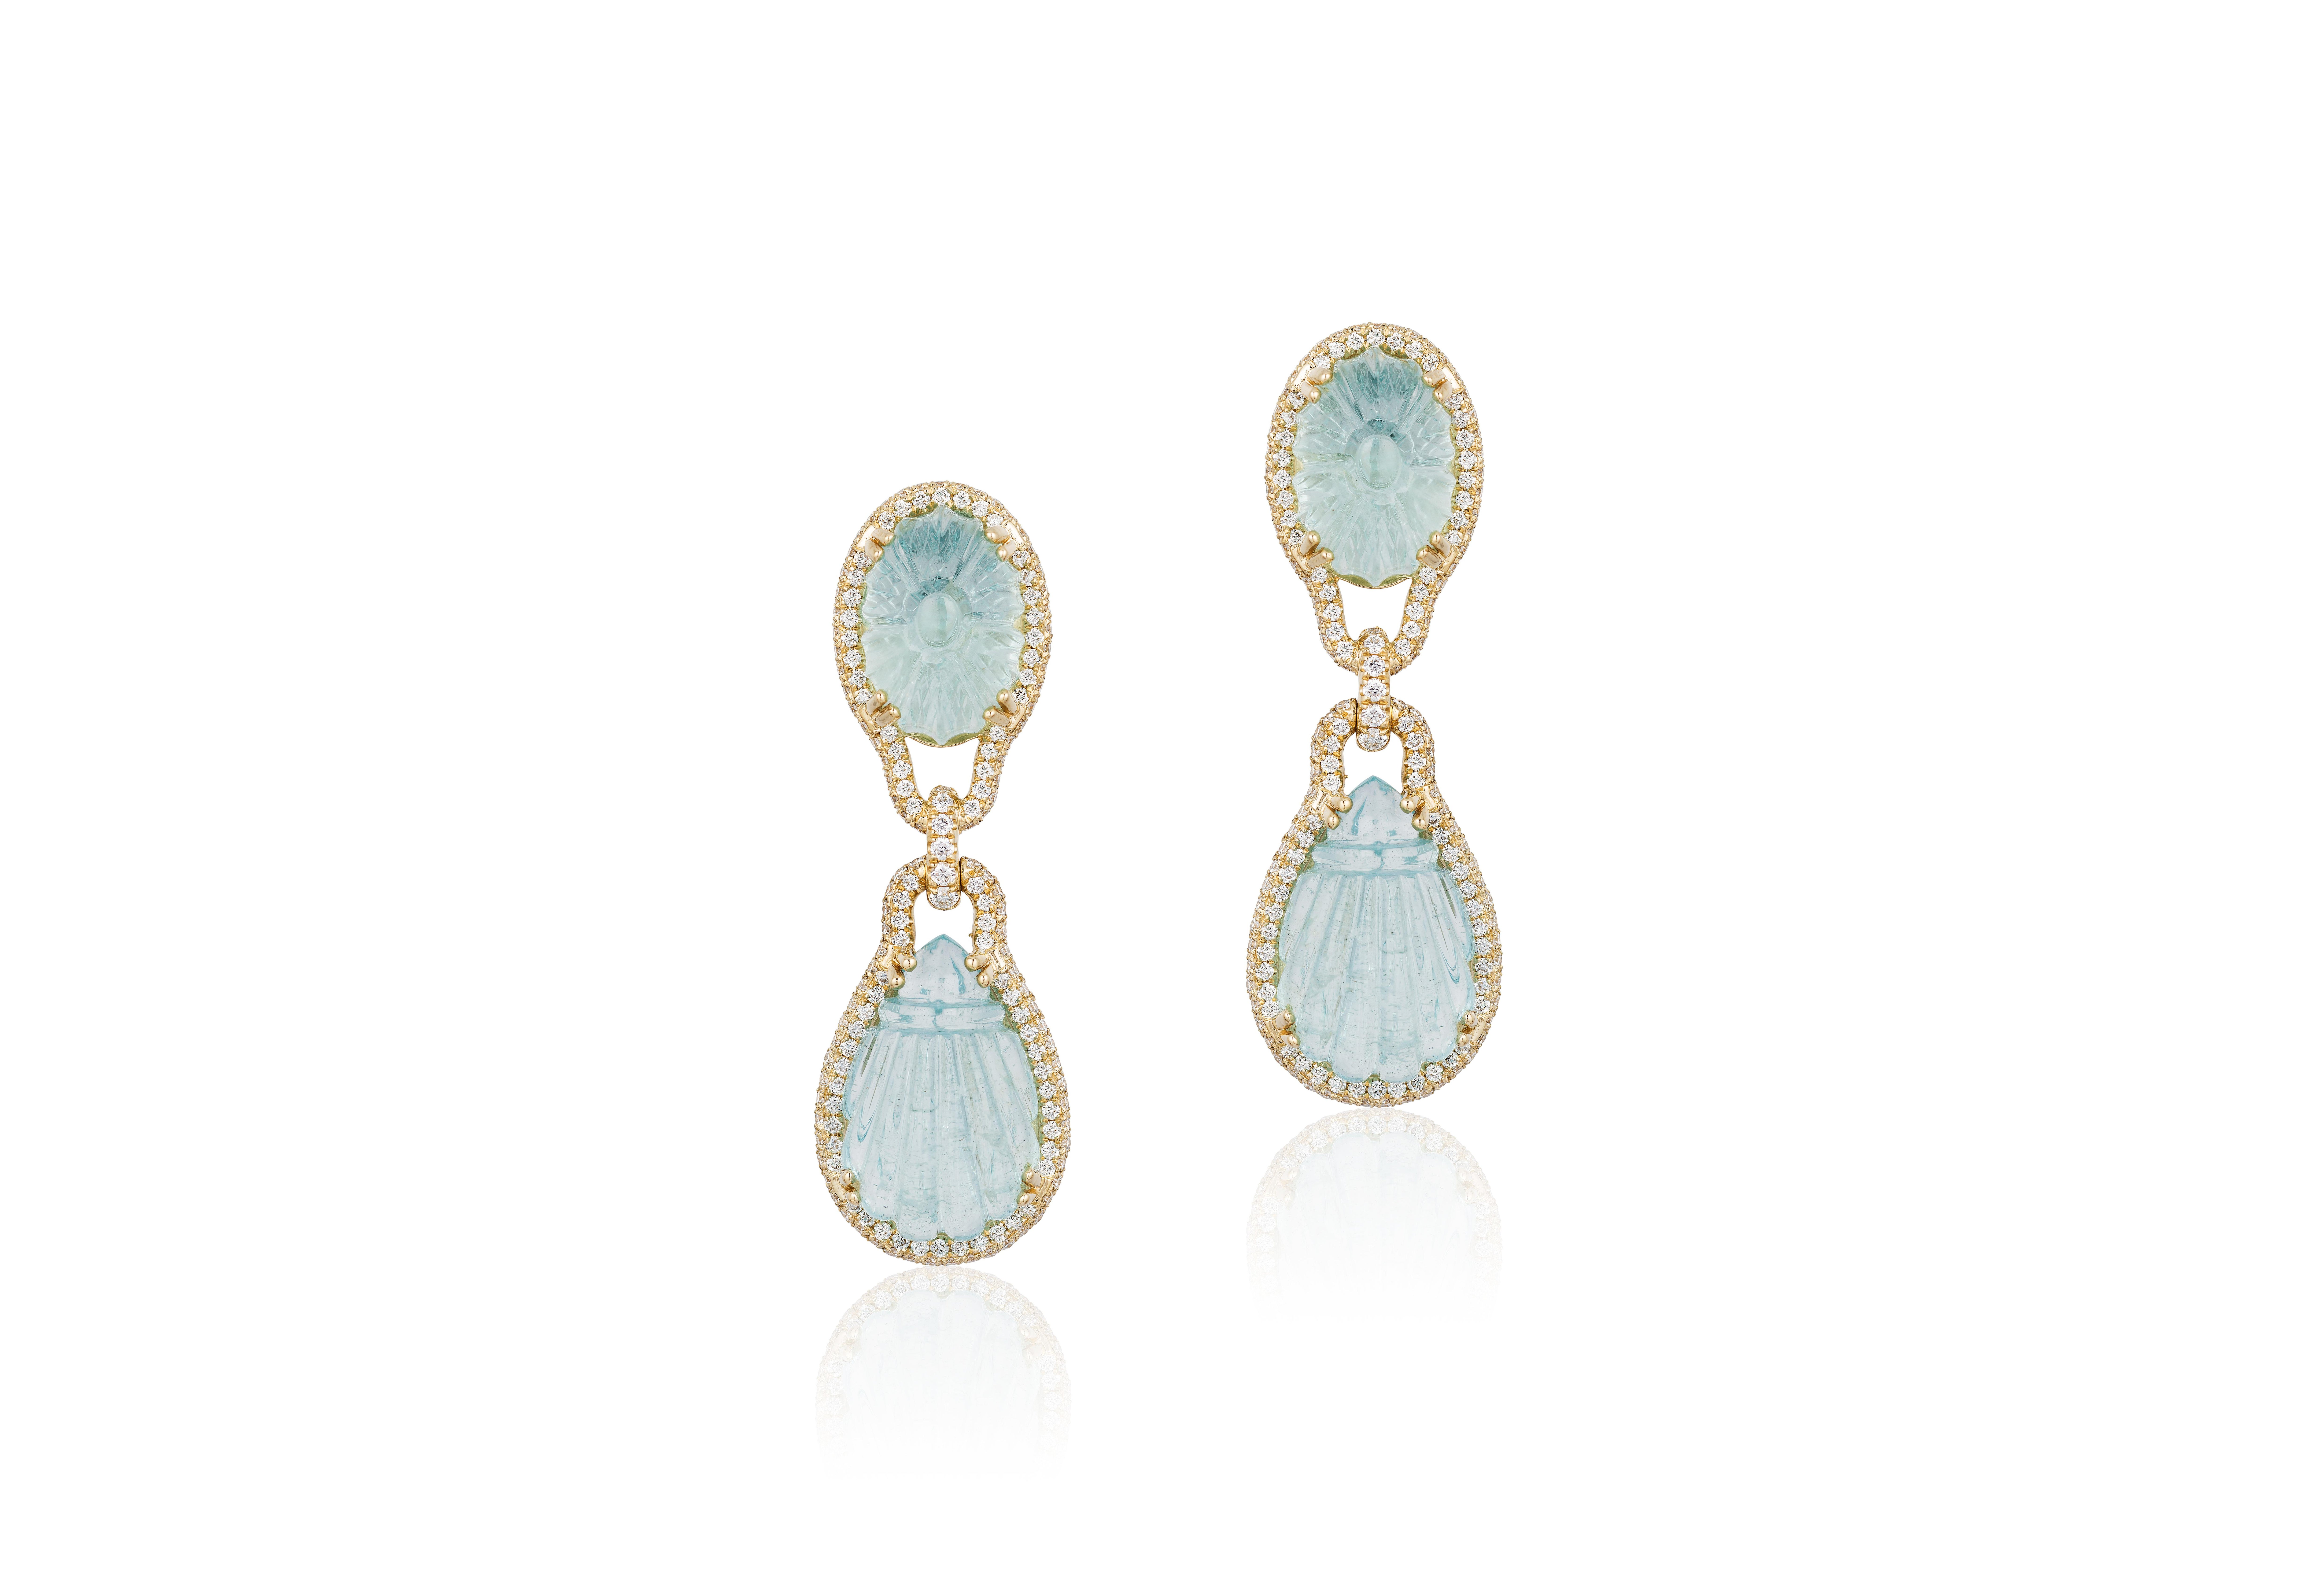 Carved Aqua Earrings with Diamonds in 18K Yellow Gold, from 'G-One' Collection

Approx. Stone Wt: 33.64 Carats (Aqua)

Diamonds: G-H / VS, Approx. Wt: 2.23 Carats